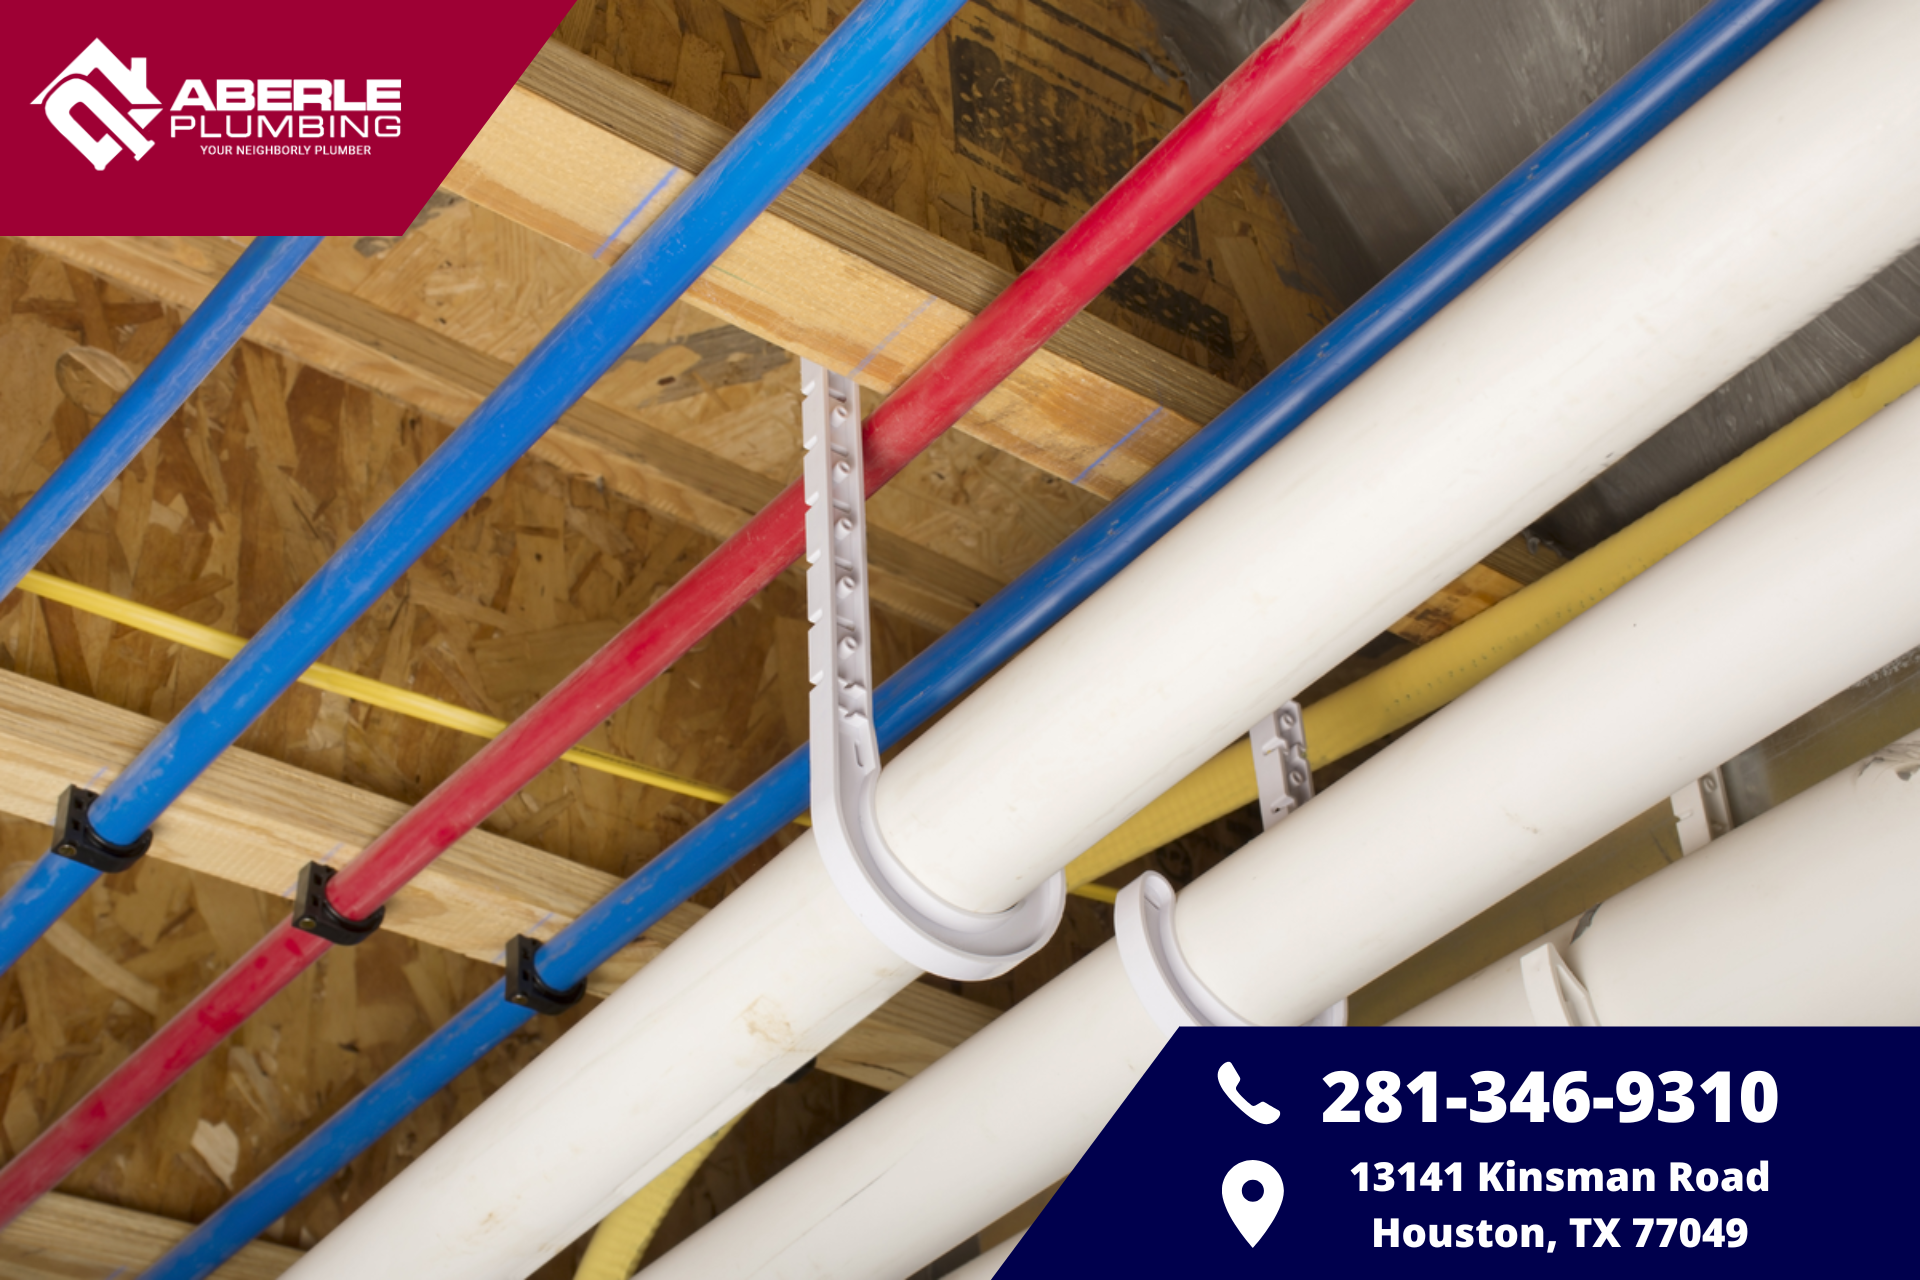 PEX pipe installed in ceiling of Houston, TX home.